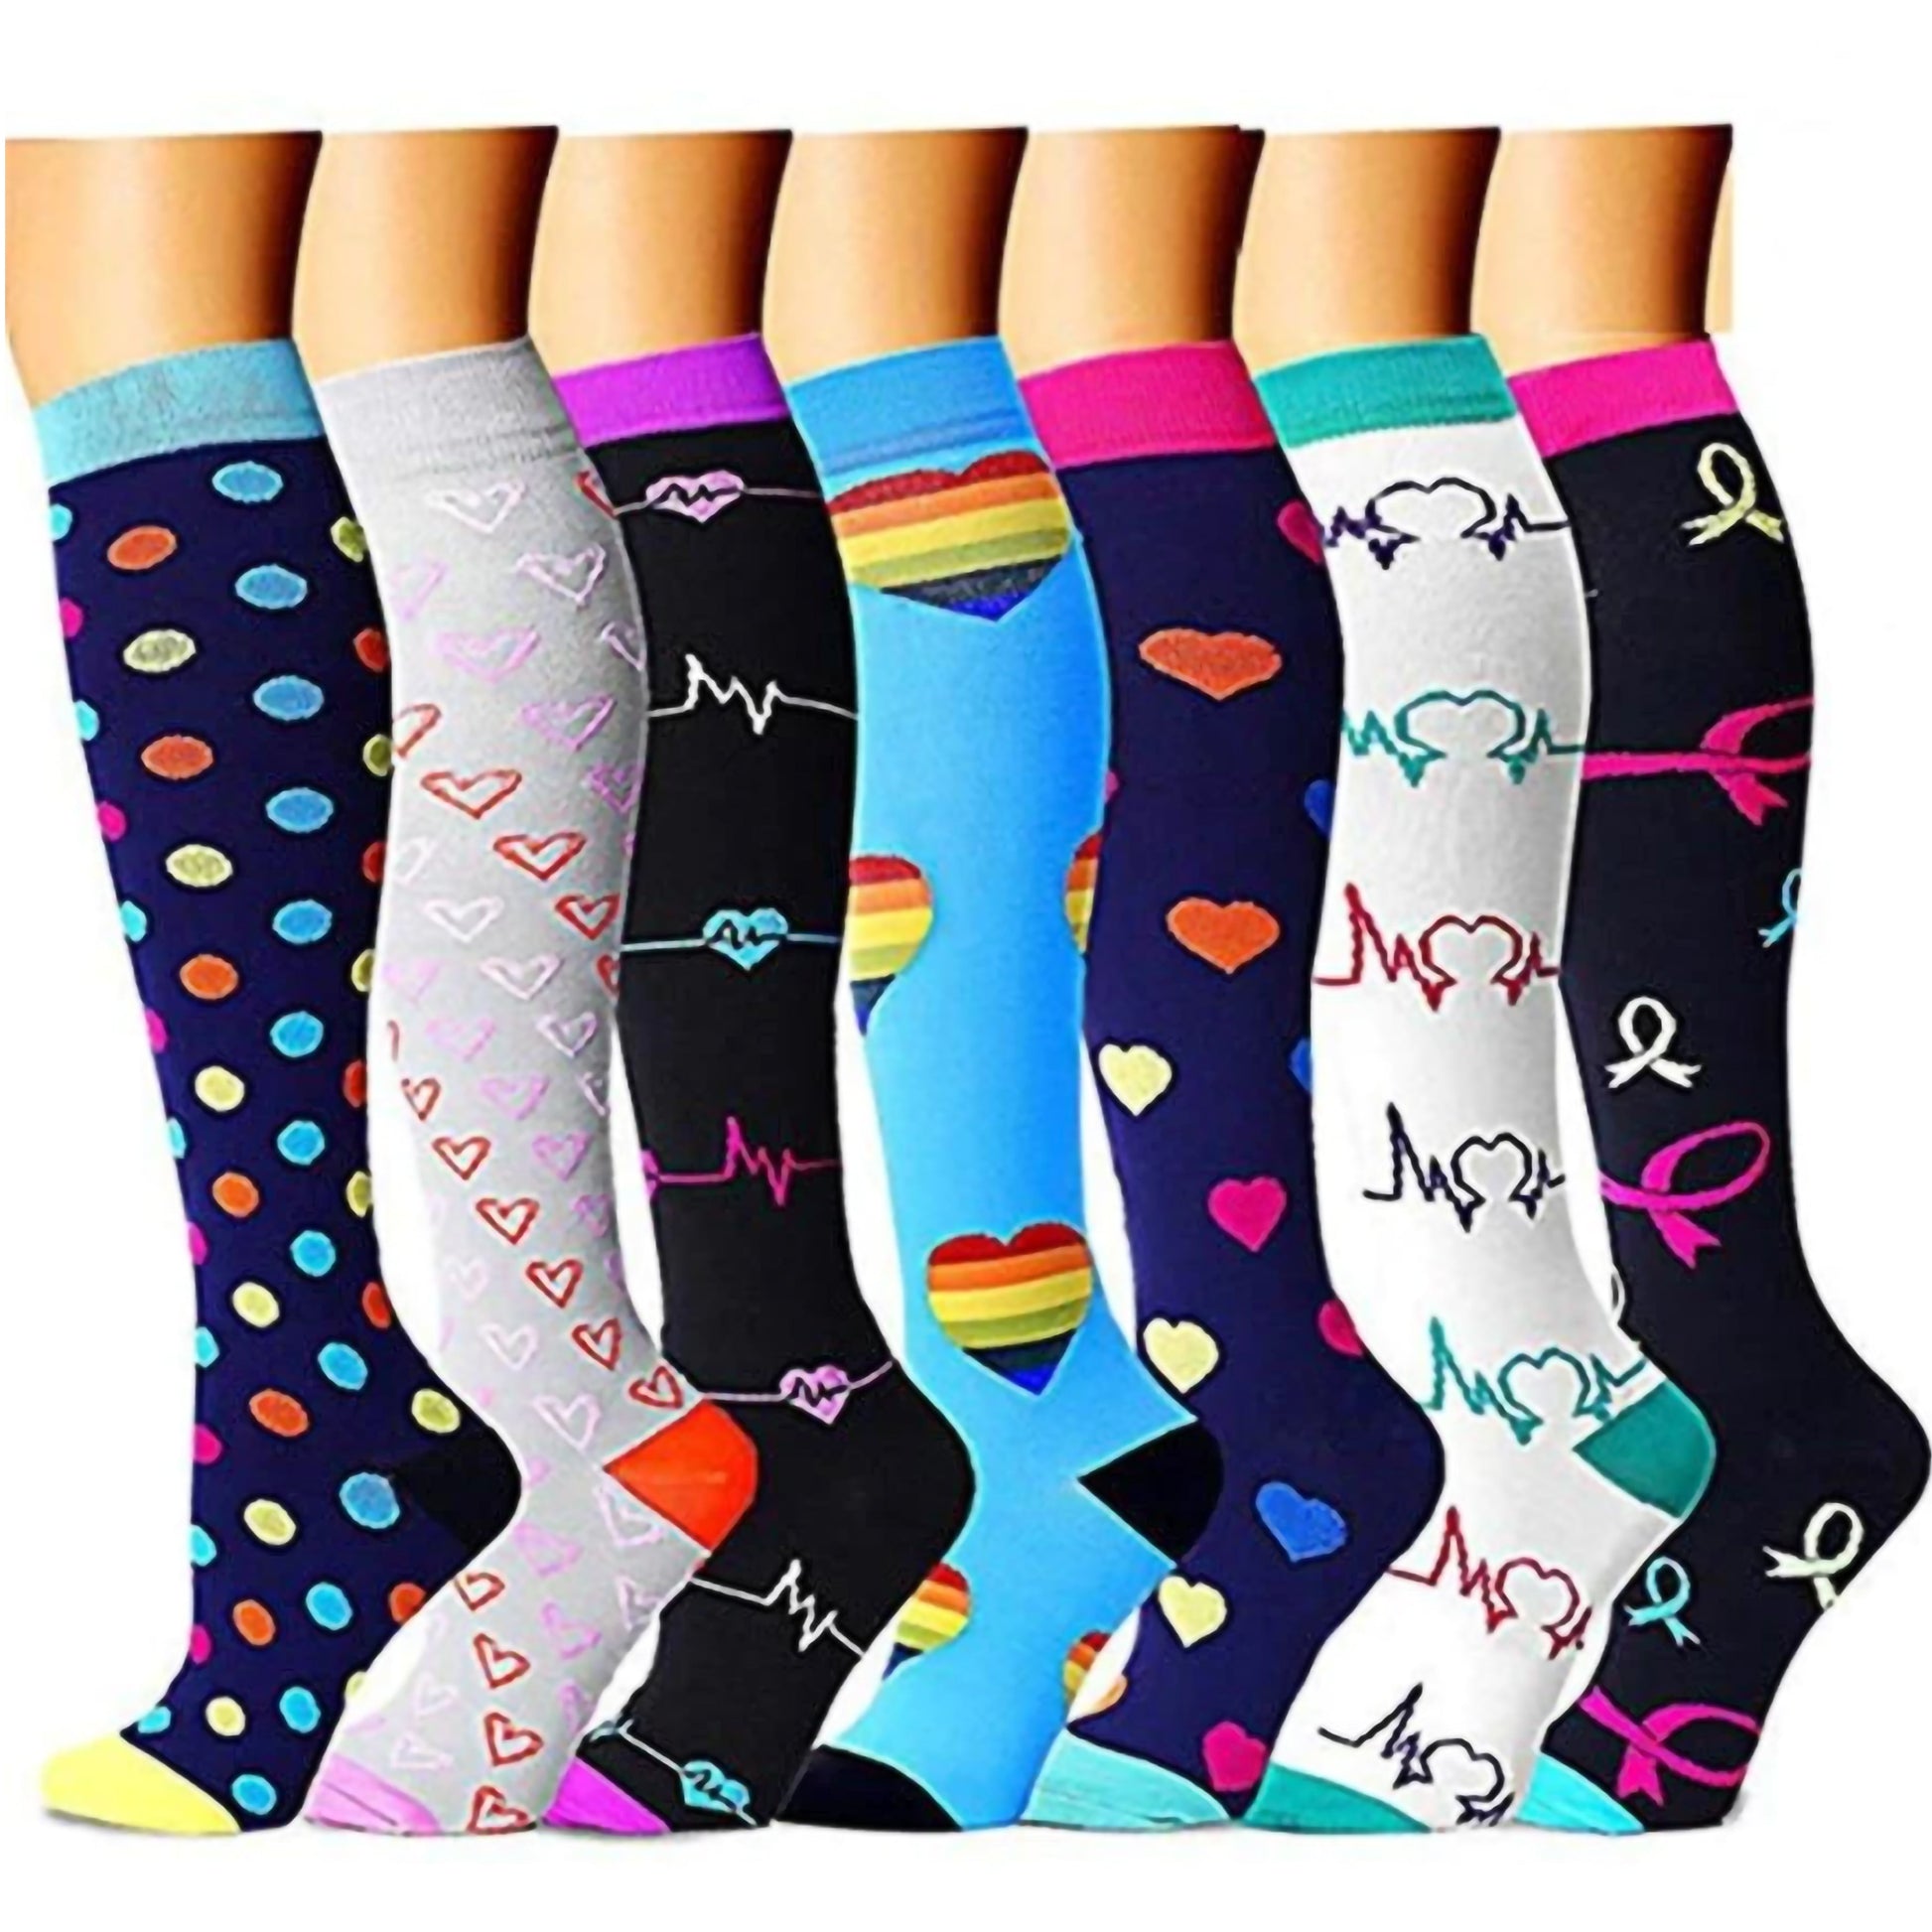 Compression socks are super cute and perfect for travel!  Cotton compression  socks, Outfits, Knee high socks outfit